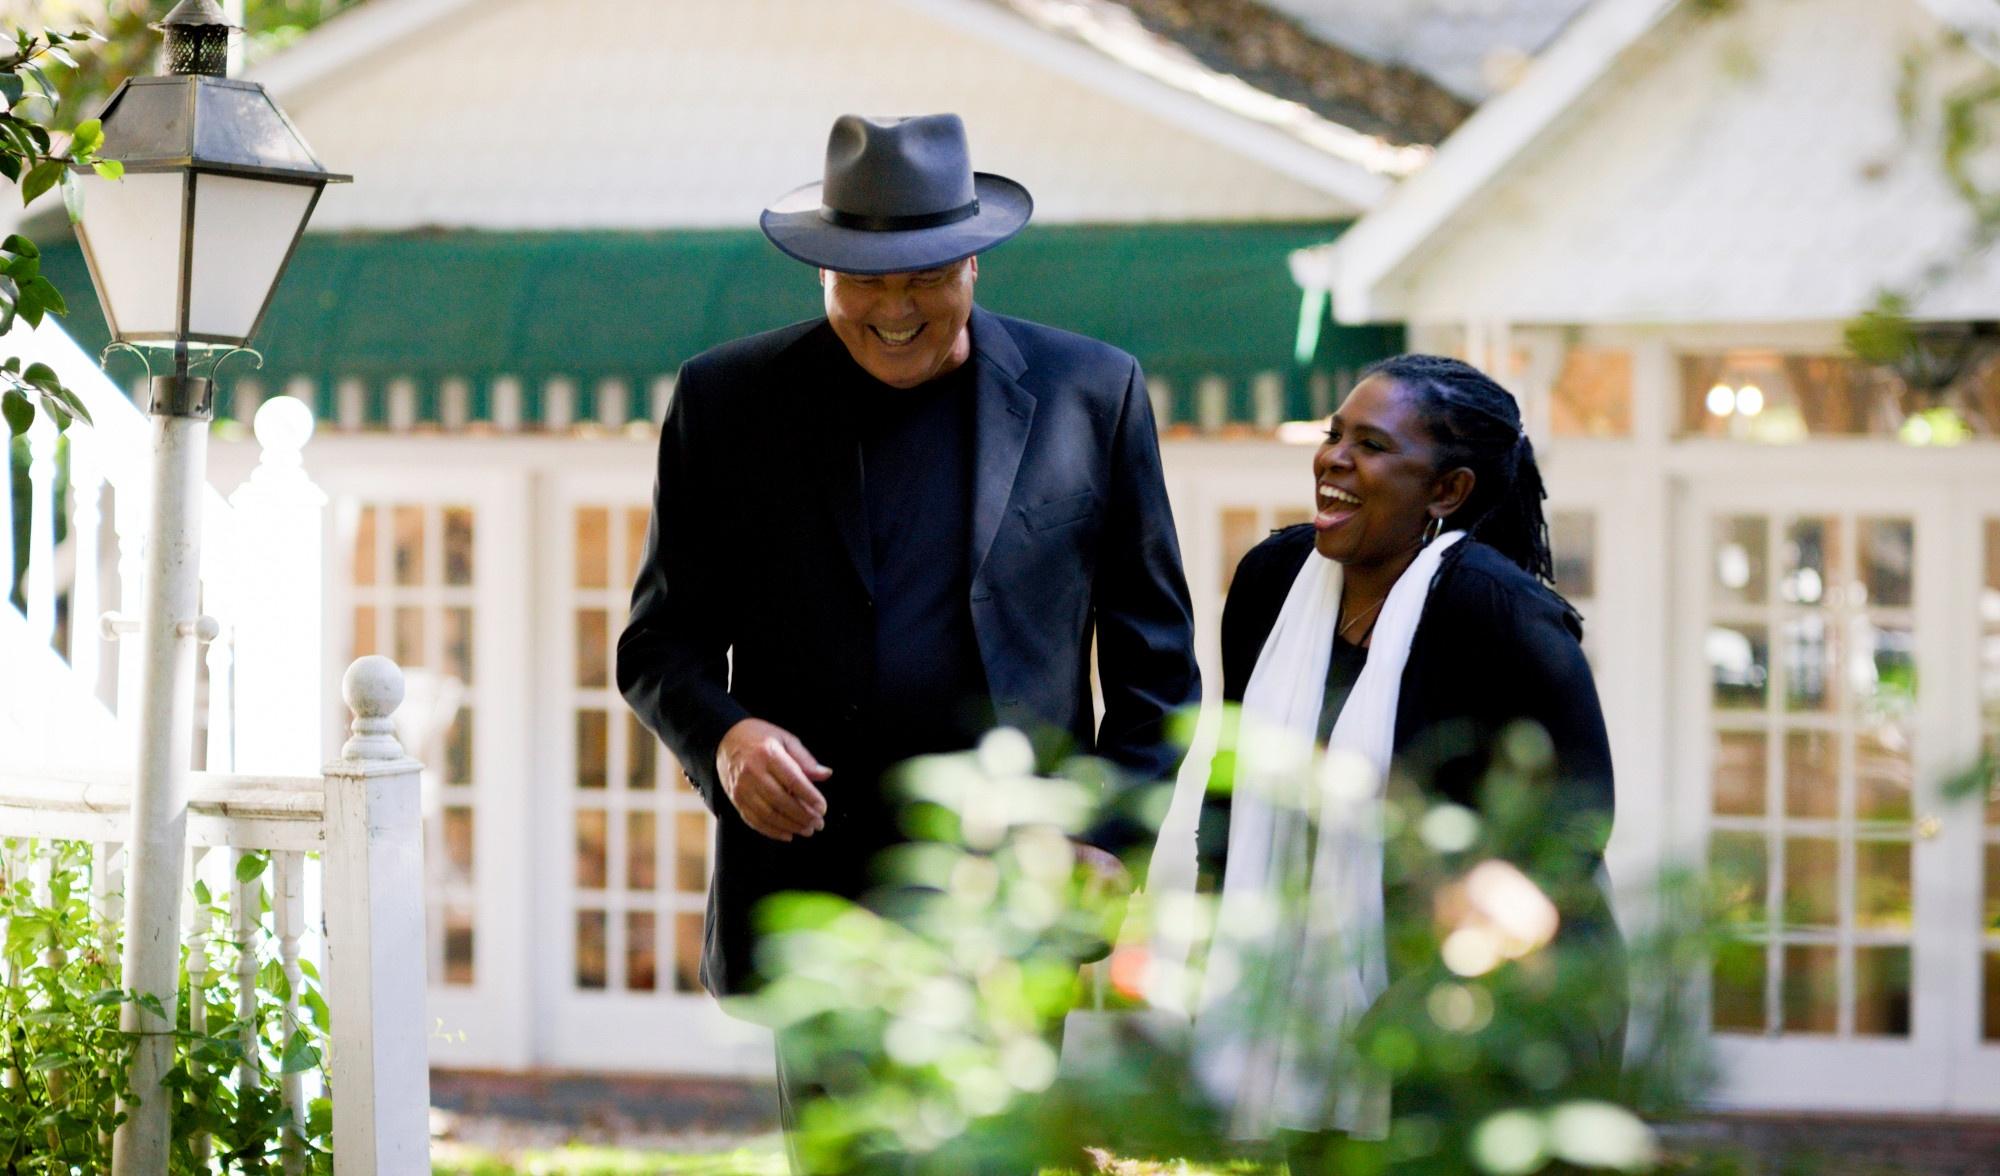 David Holt and Ruthie Foster walking